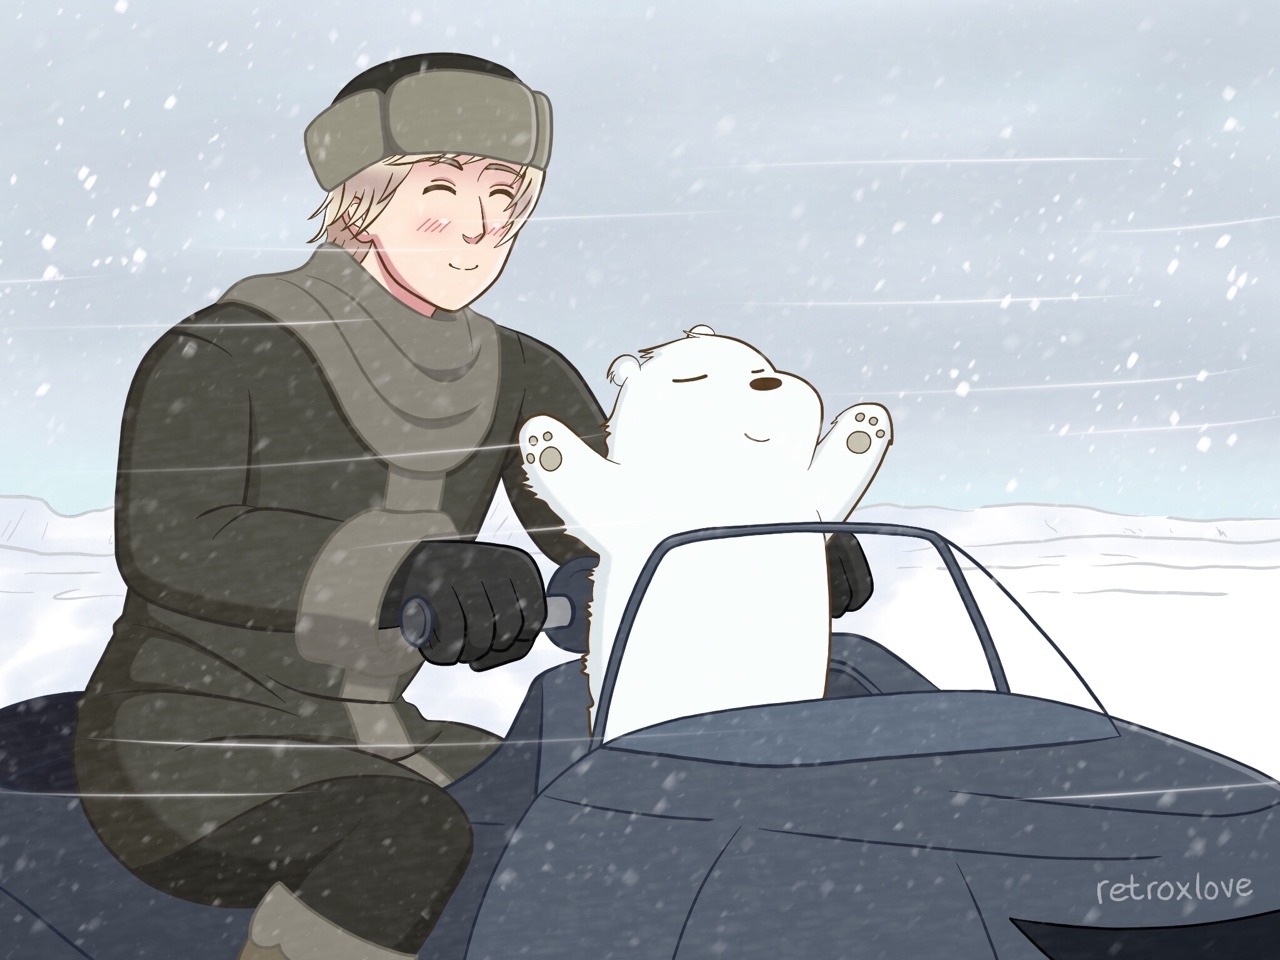 More baby Ice Bear and Ivan (♡ˊ艸ˋ♡)